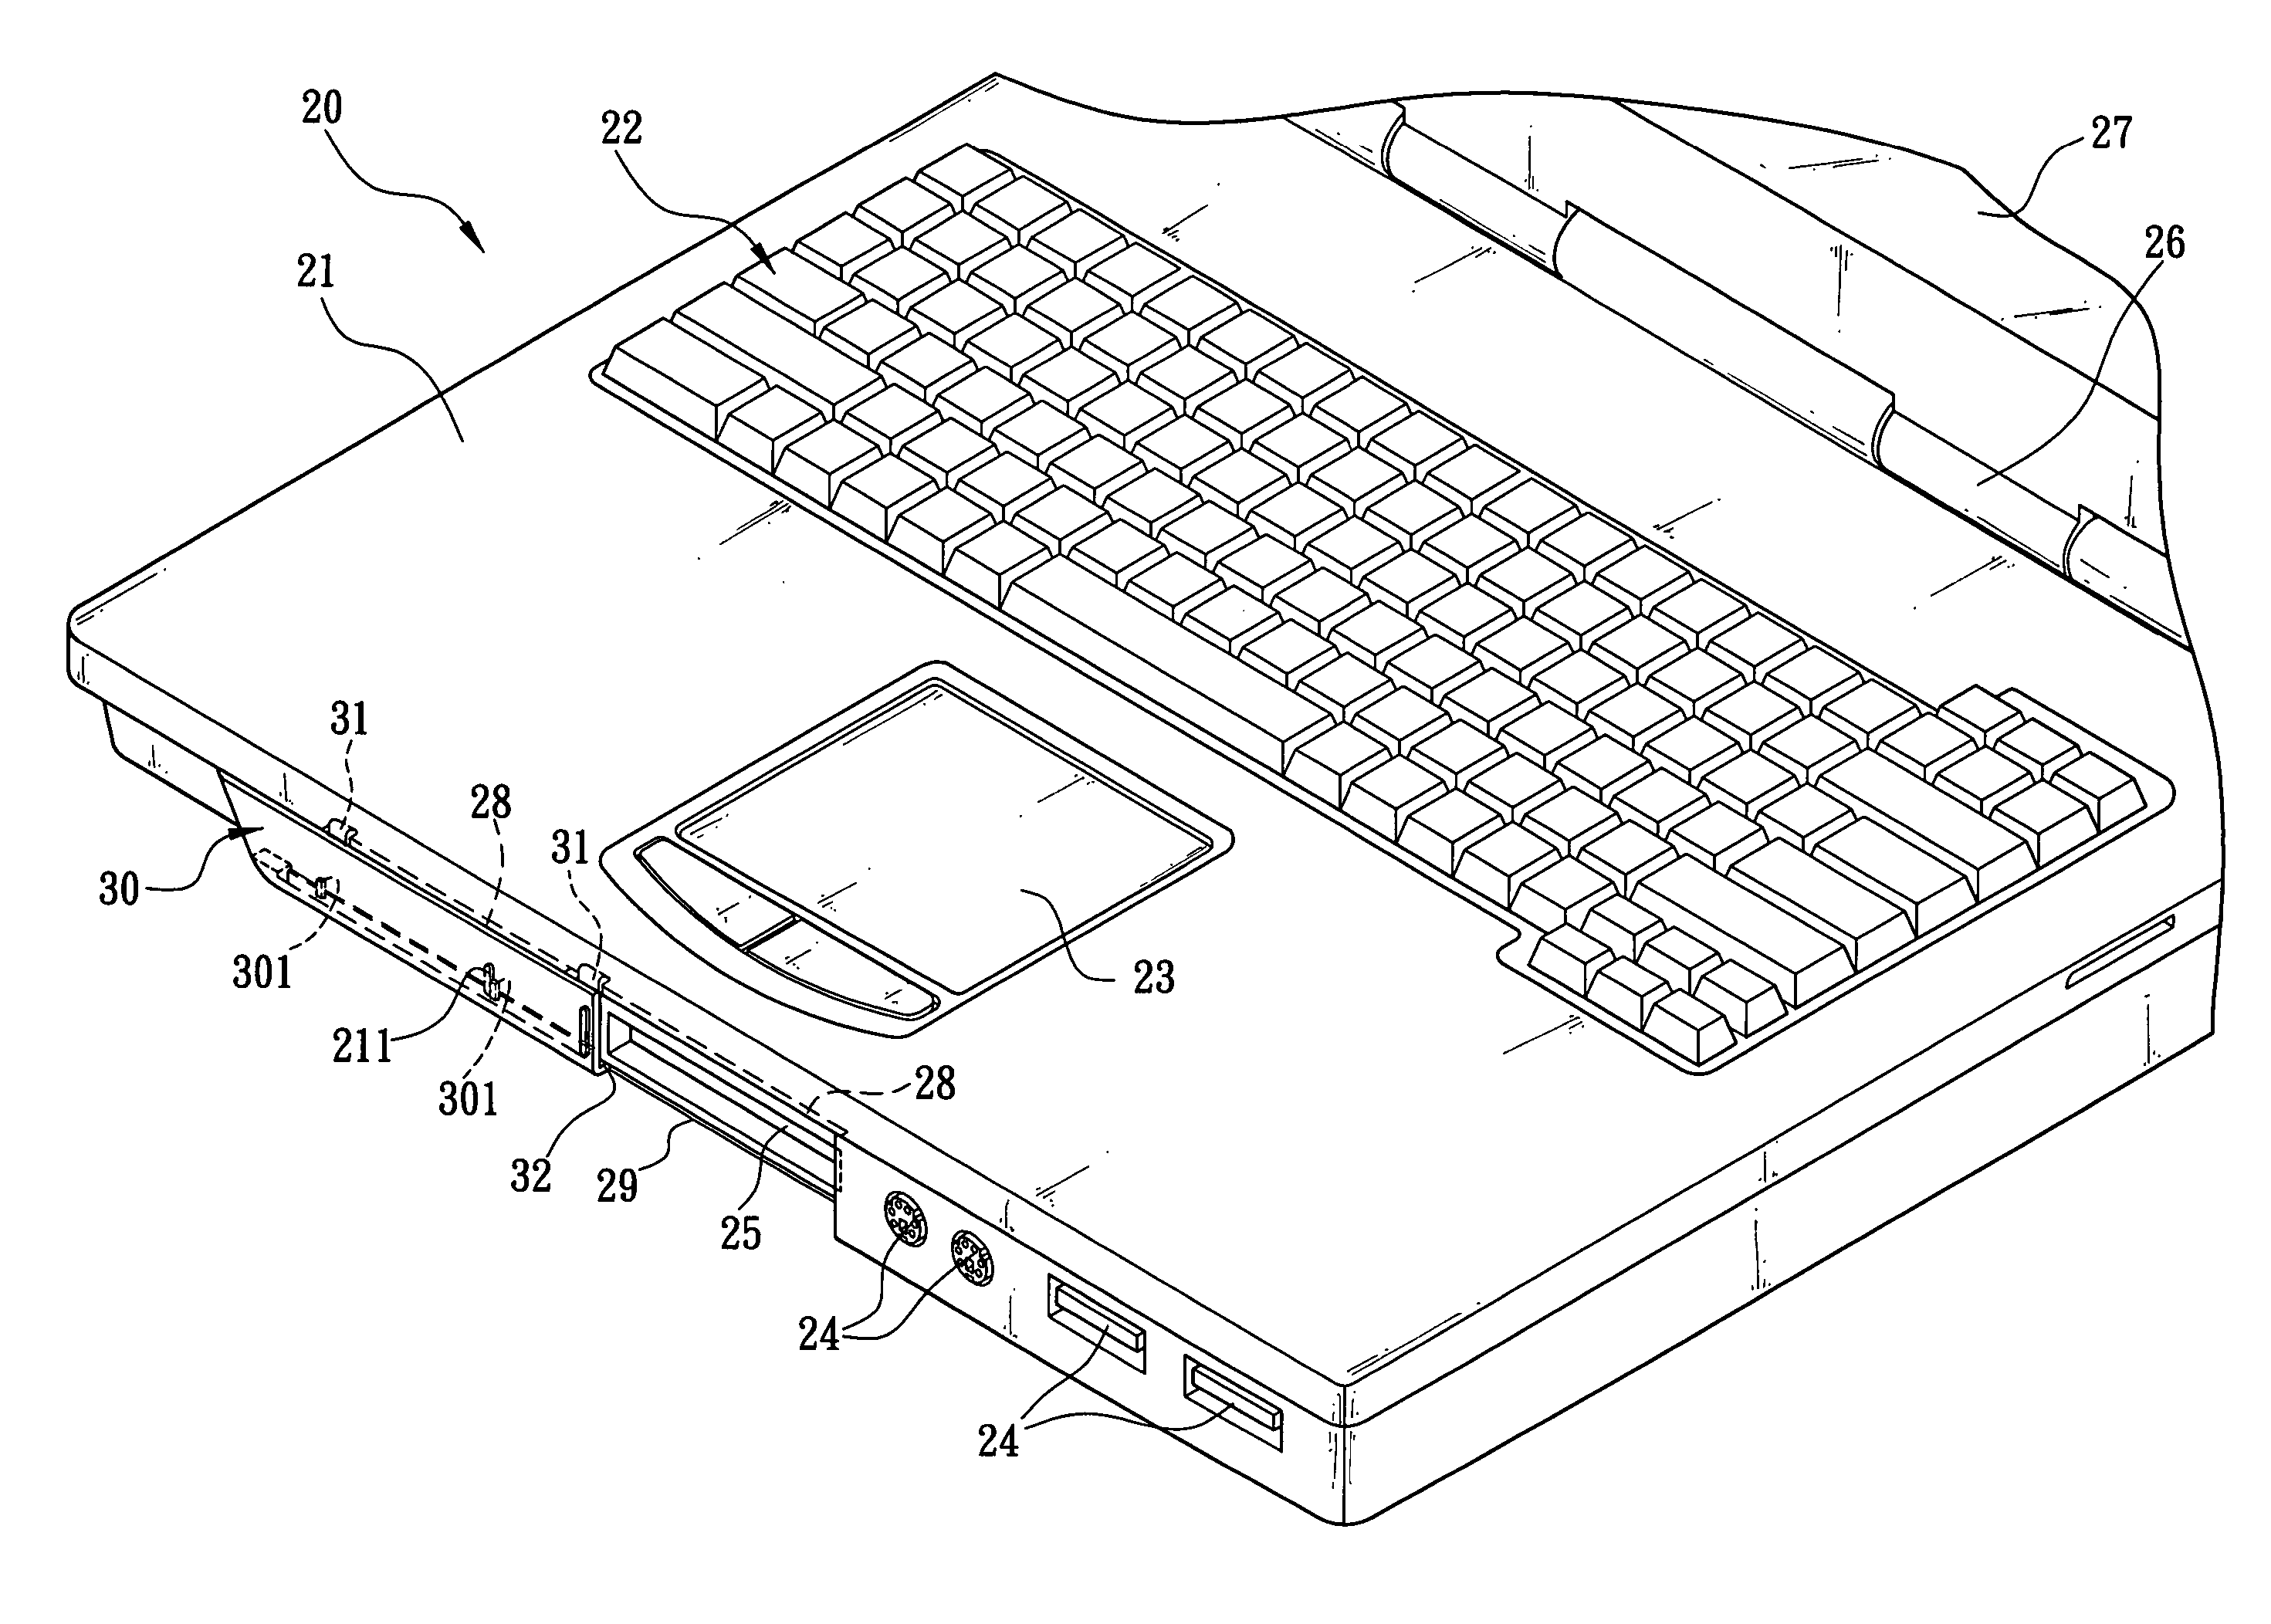 Sliding cover for slot of electronic device